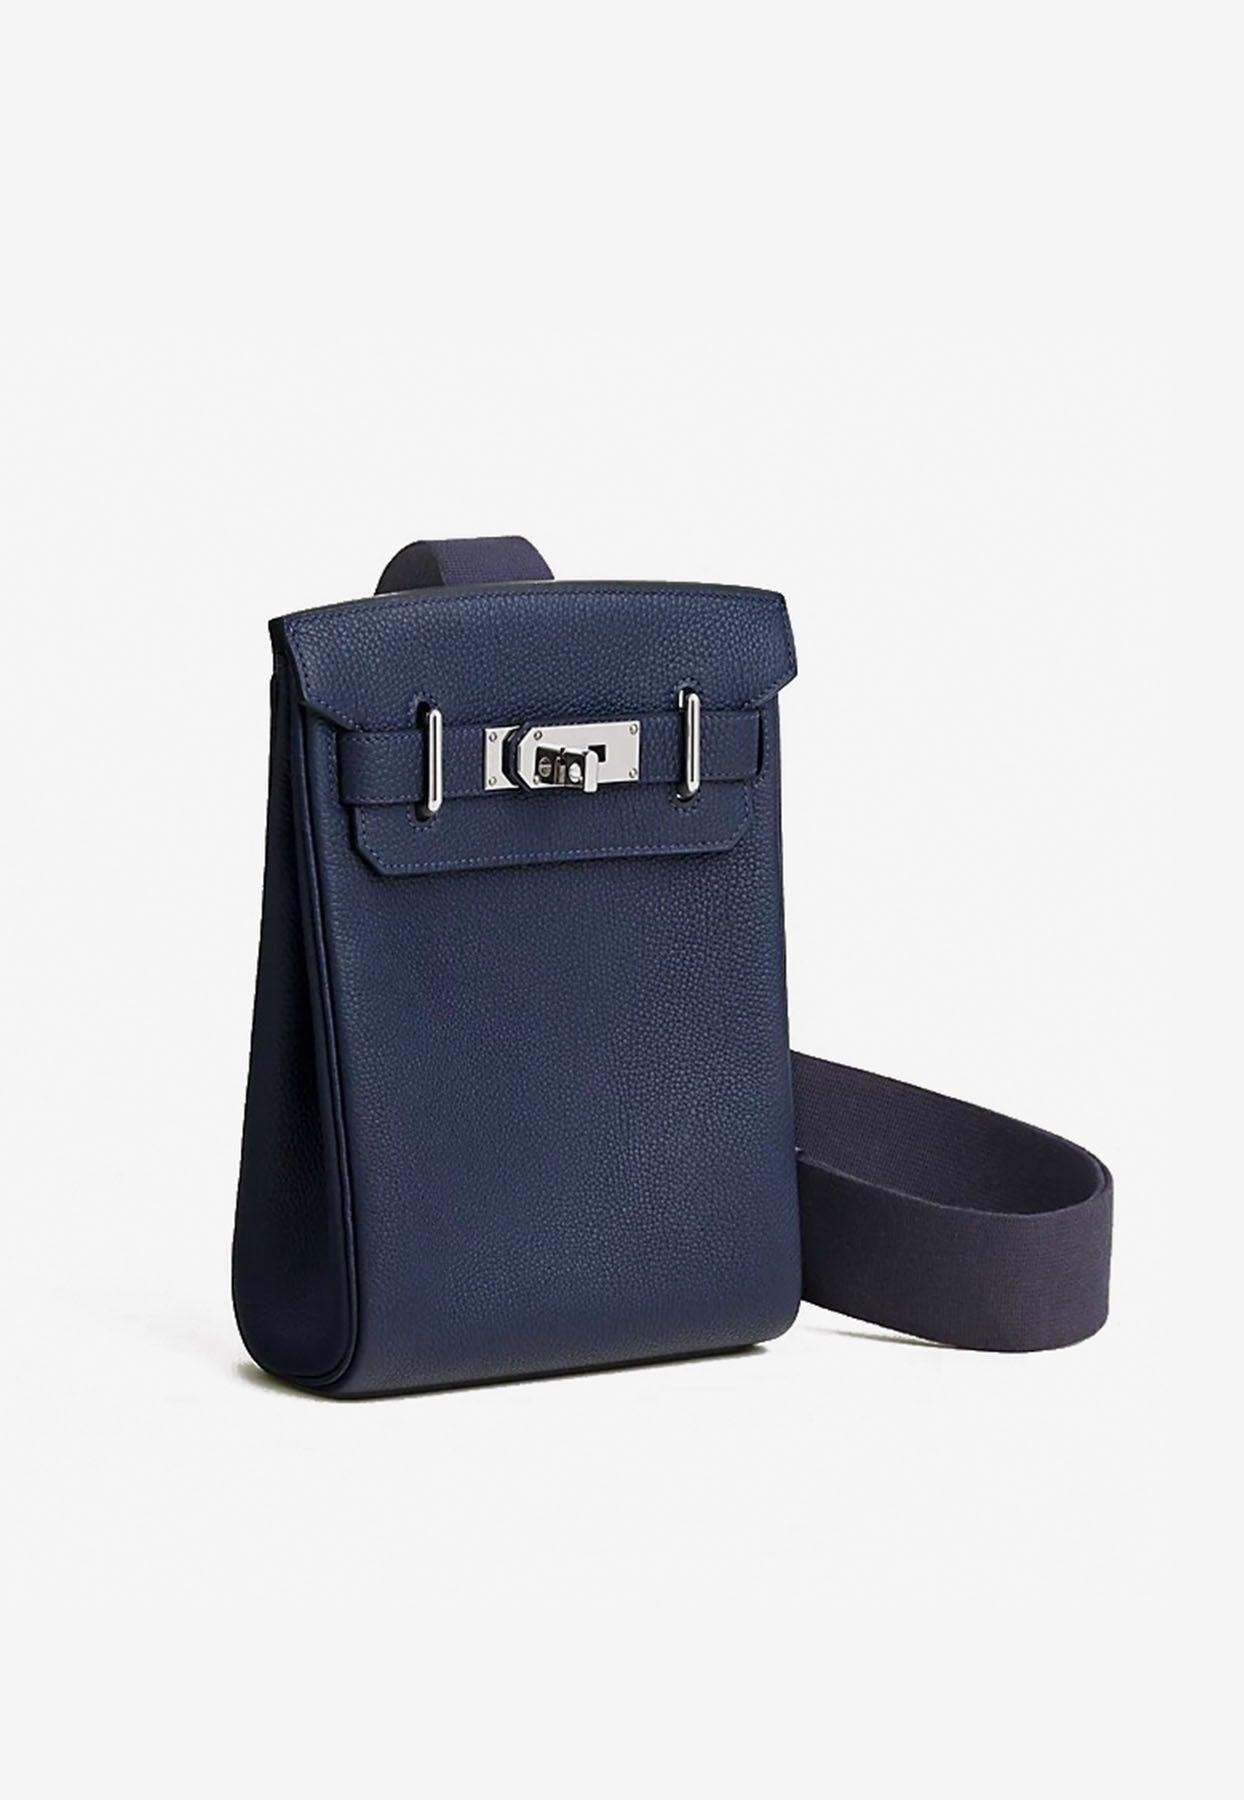 Hermès Hac A Dos Pm Backpack In Bleu Nuit Togo With Palladium Hardware in  Blue